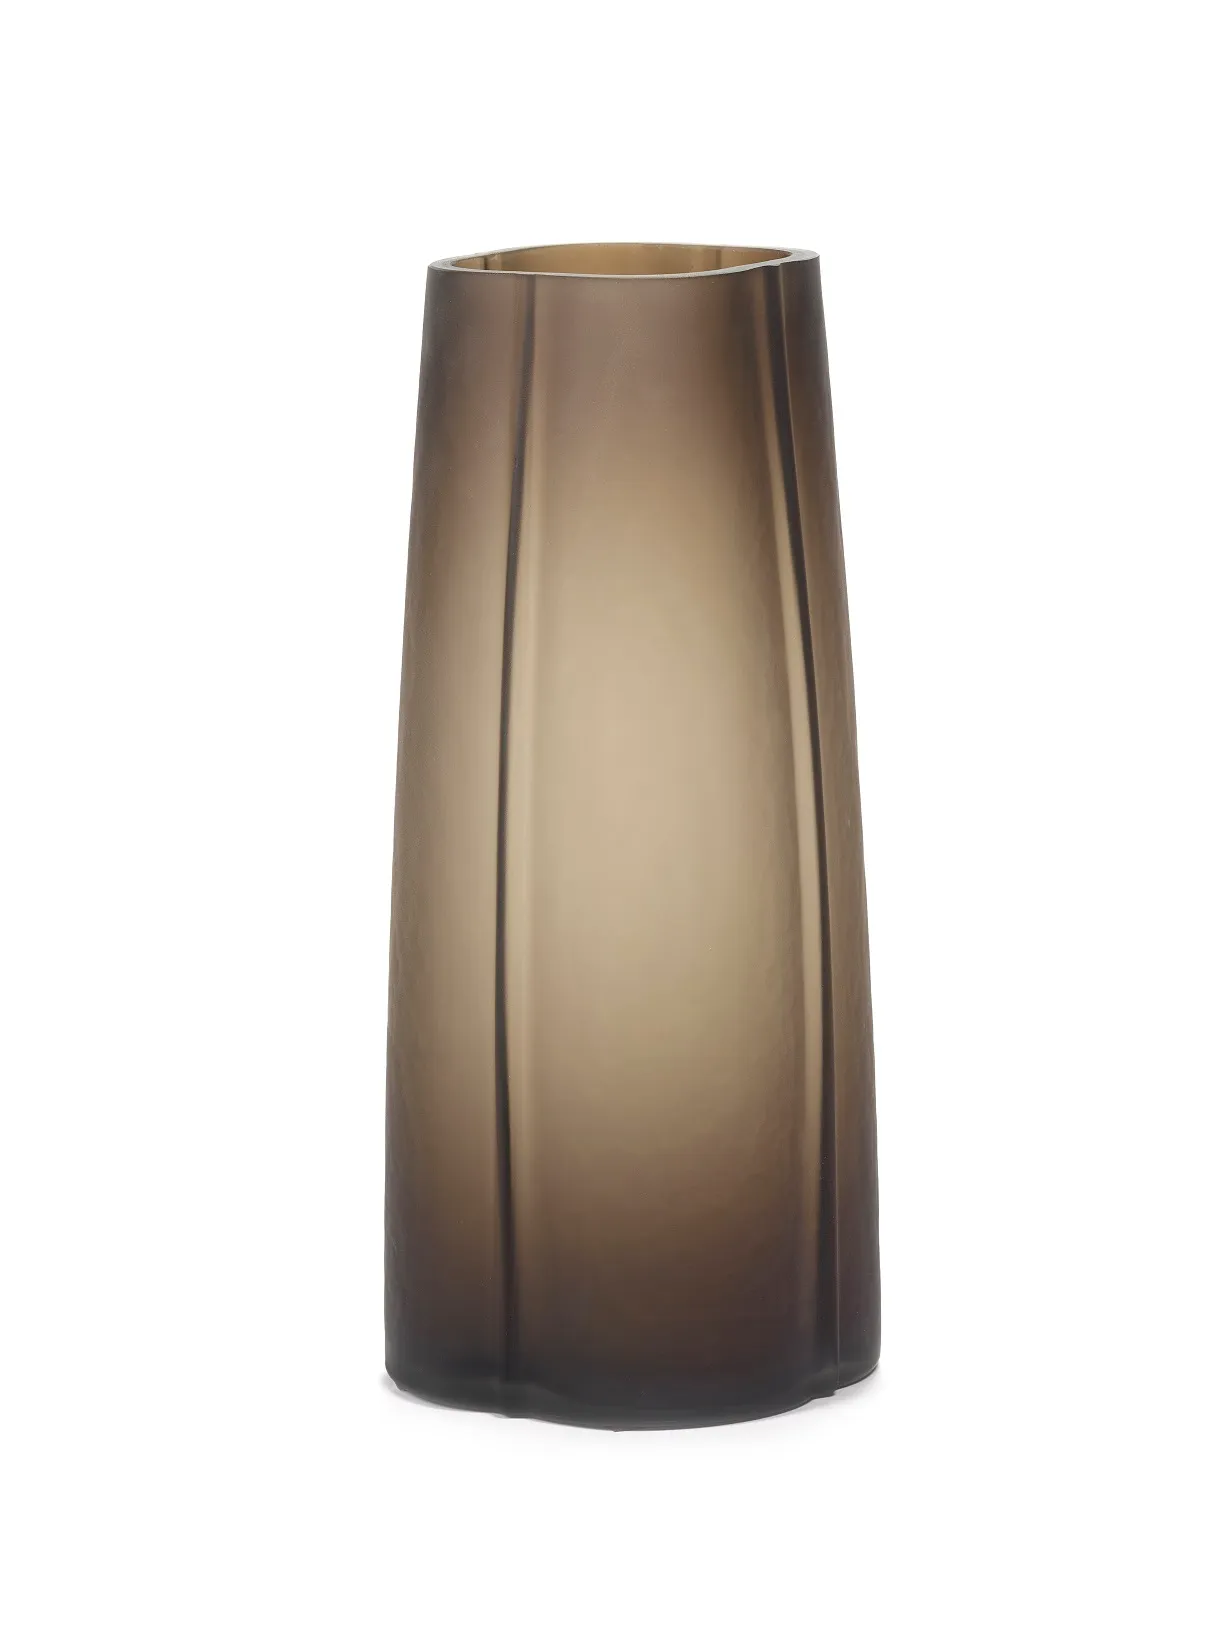 Vase Brown Shapes Collection Serax L 17.4 W 17.4 H 40 CM